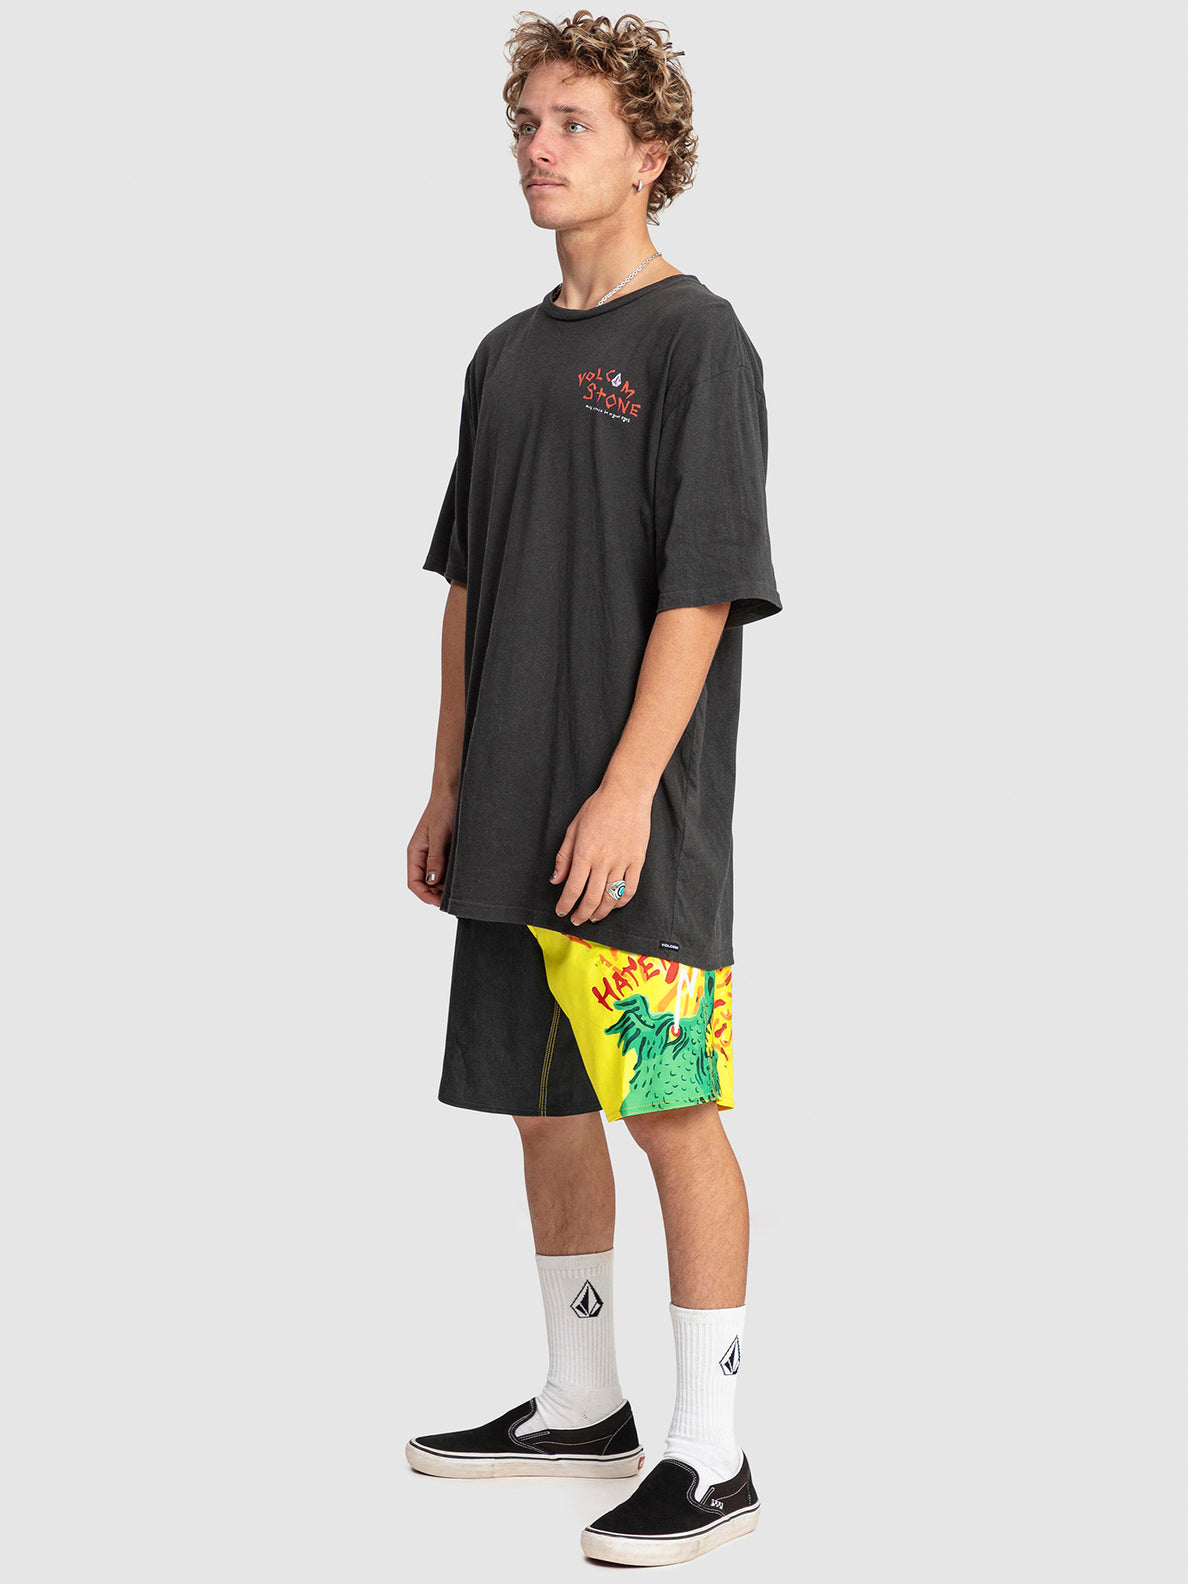 Featured Artist Ozzy Wrong Stoney Boardshort 19